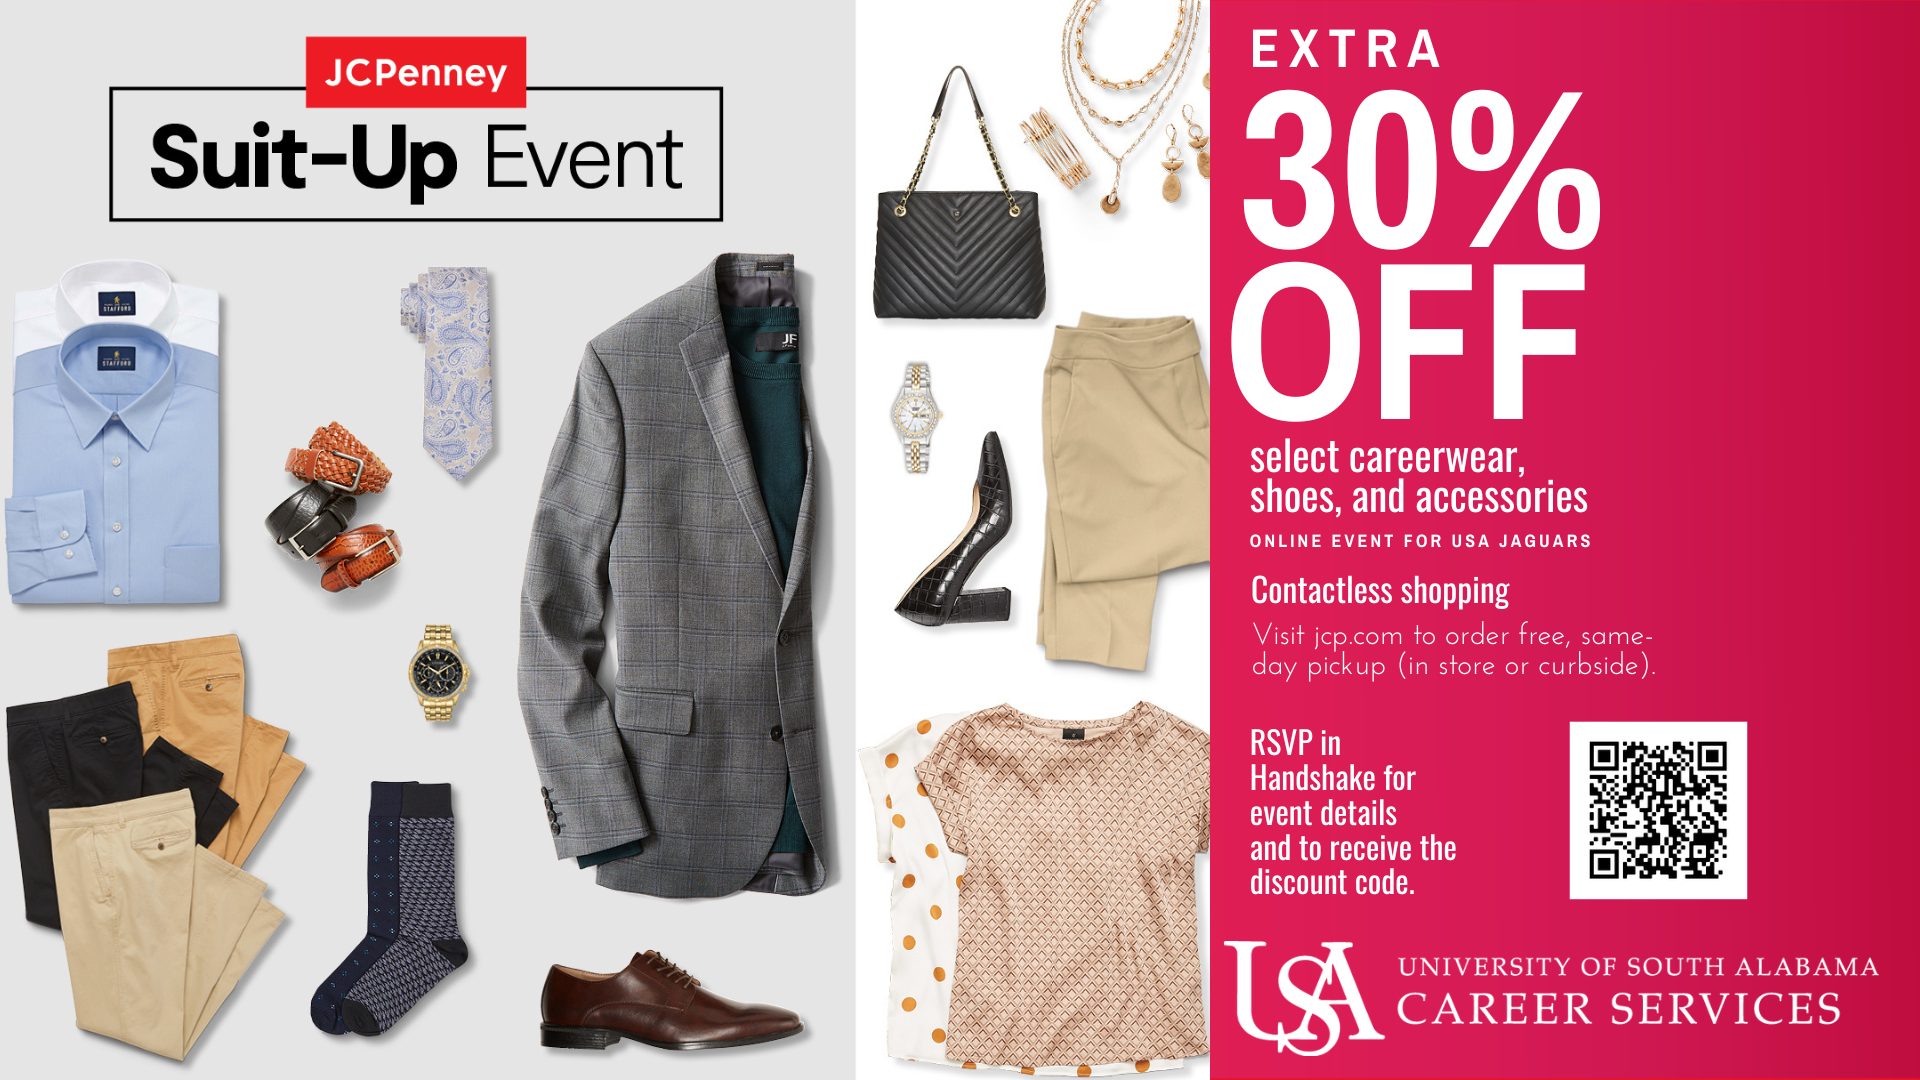 Confidence is key in the job search process. Whether you are interviewing, interning, or starting a new job after graduation, find everything you need to finish your perfect look at the JCPenney Suit-Up Event.
